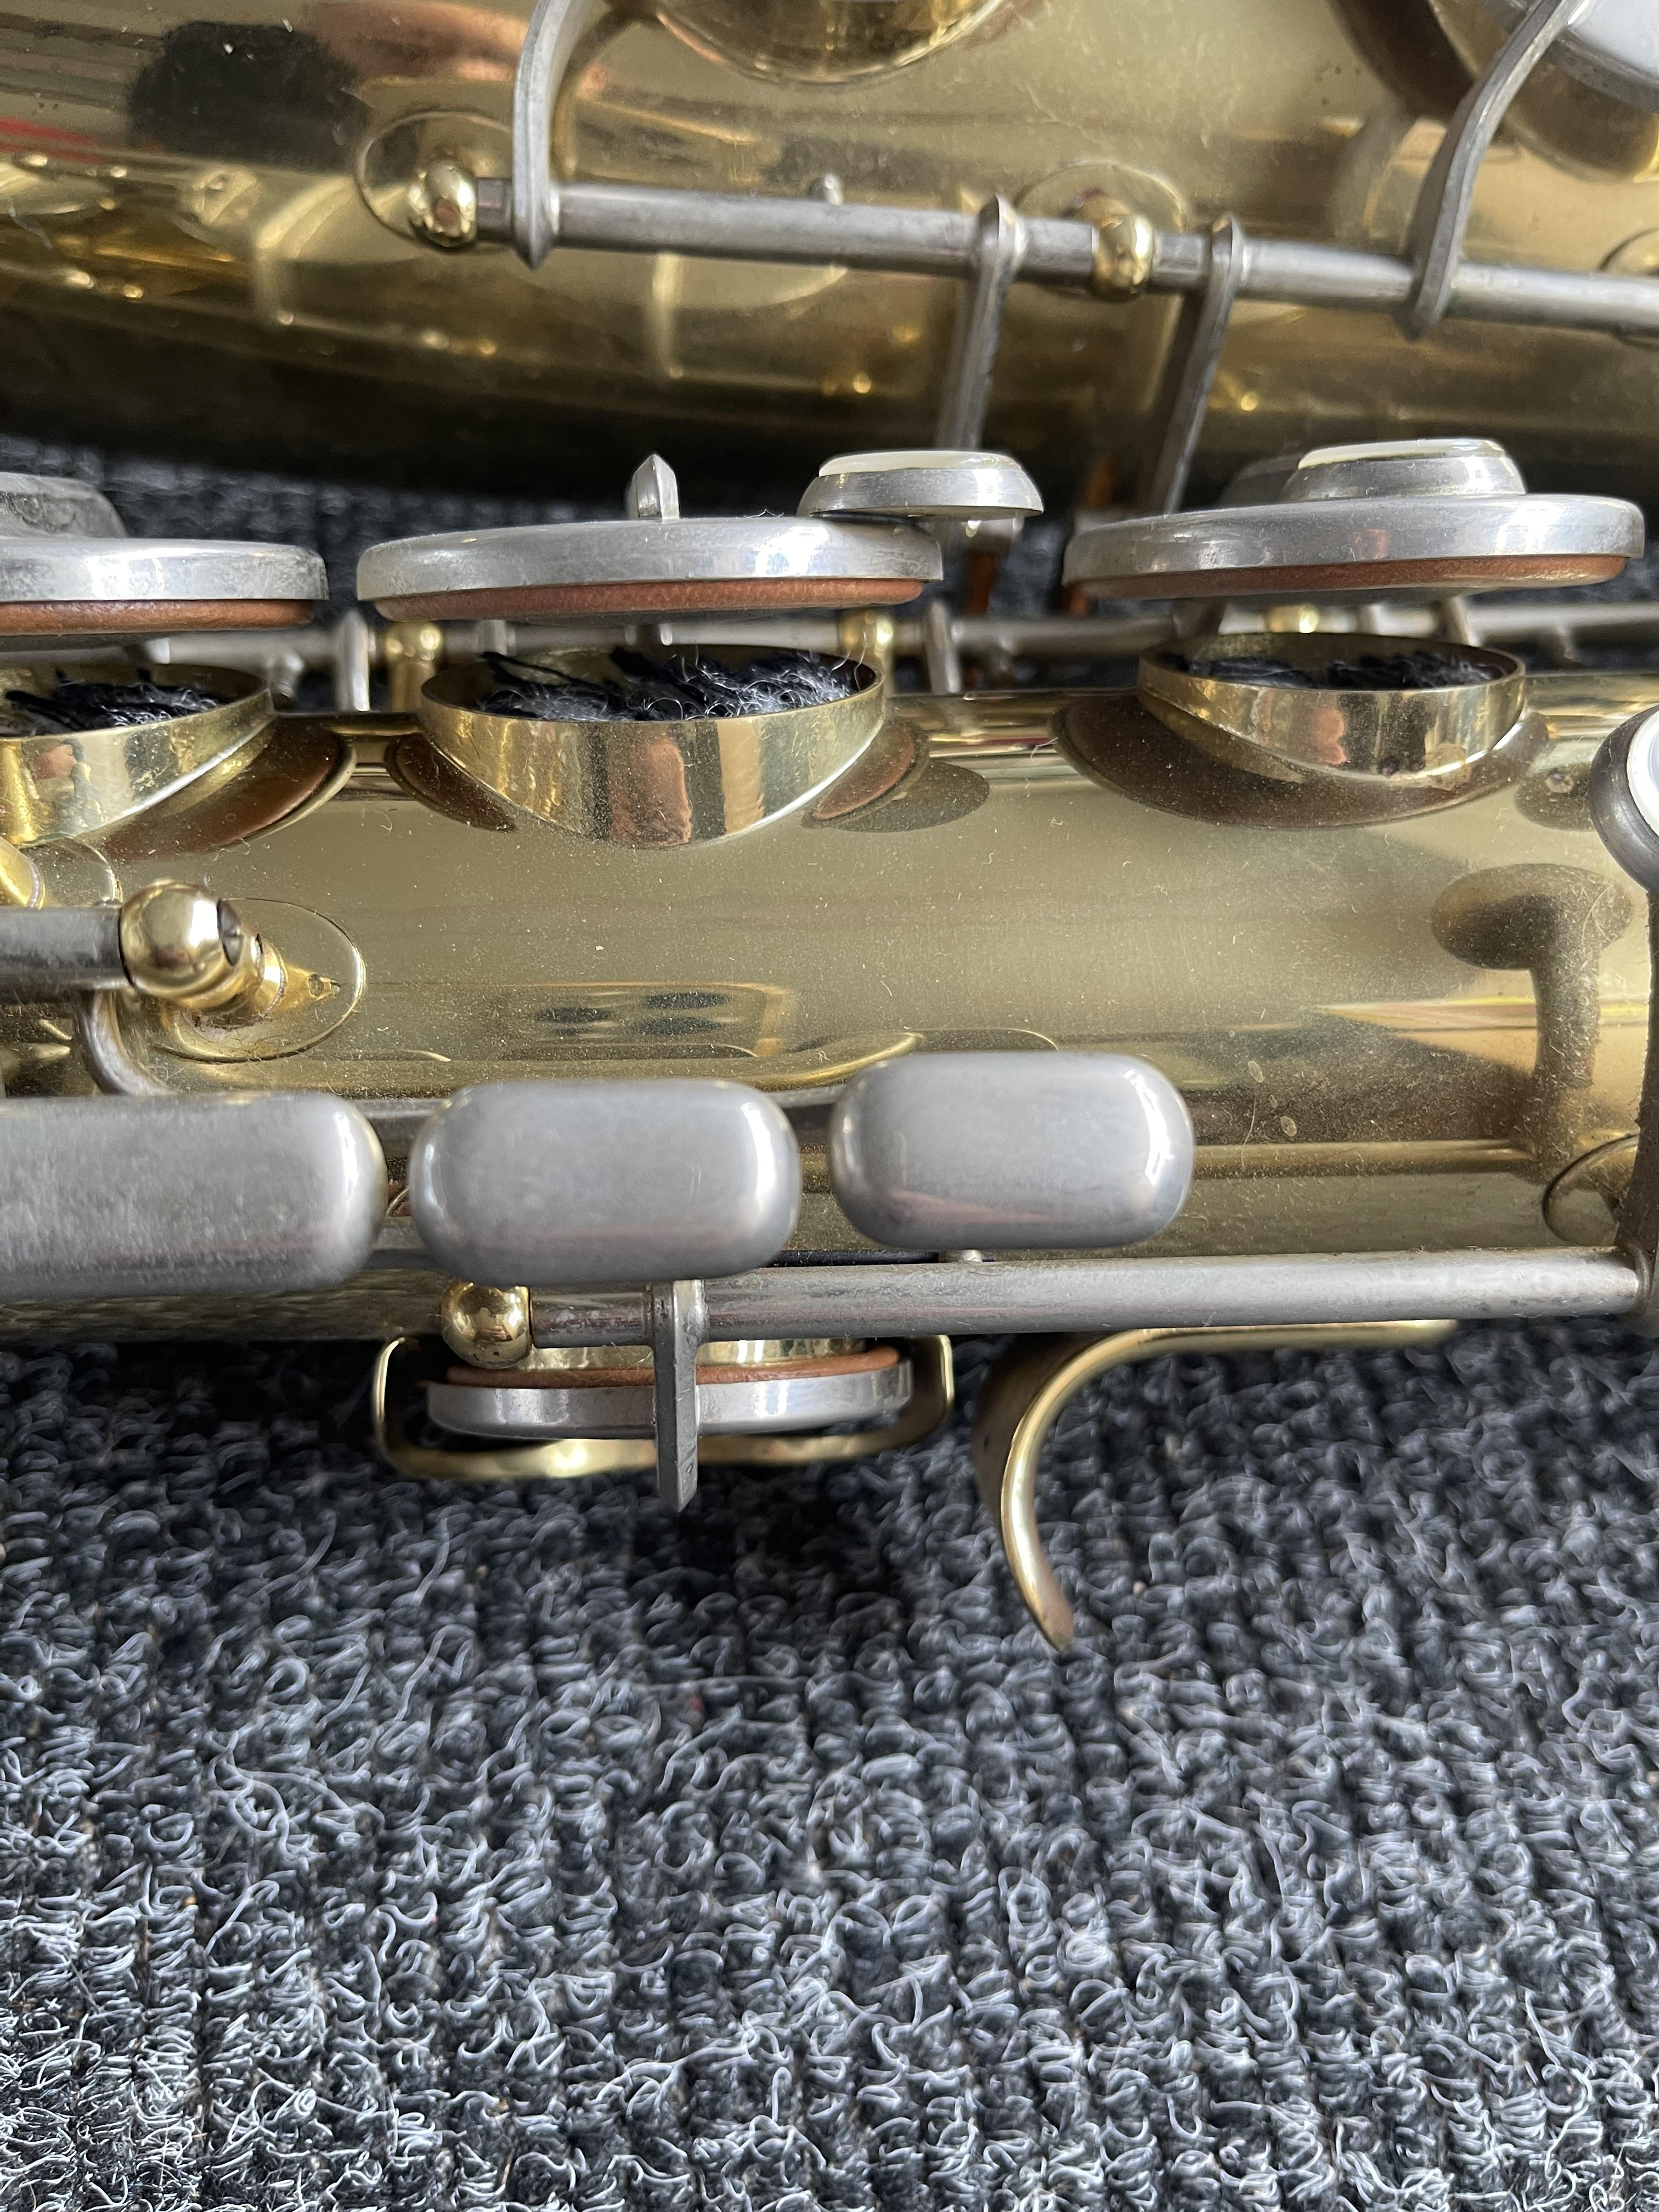 B&H 400 made for Boosey & Hawkes Cased Saxophone. - Image 28 of 31